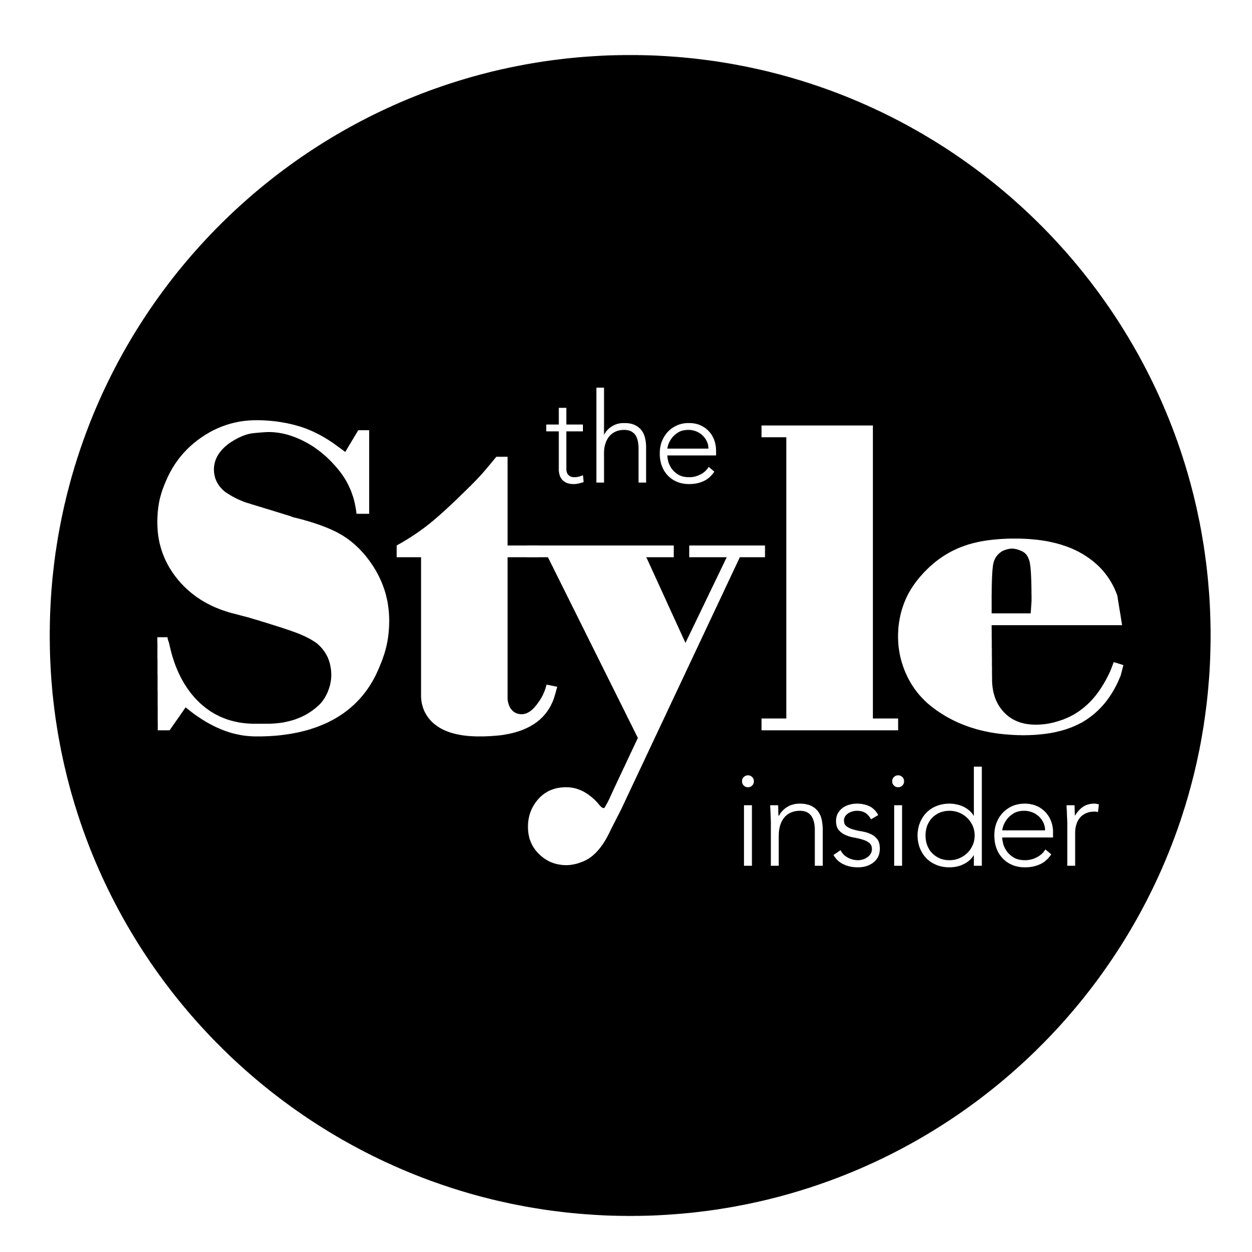 For all your Fashionable Treats | Perth Based Online Clothing Store | #thestyleinsider insiderhelp@thestyleinsider.com.au